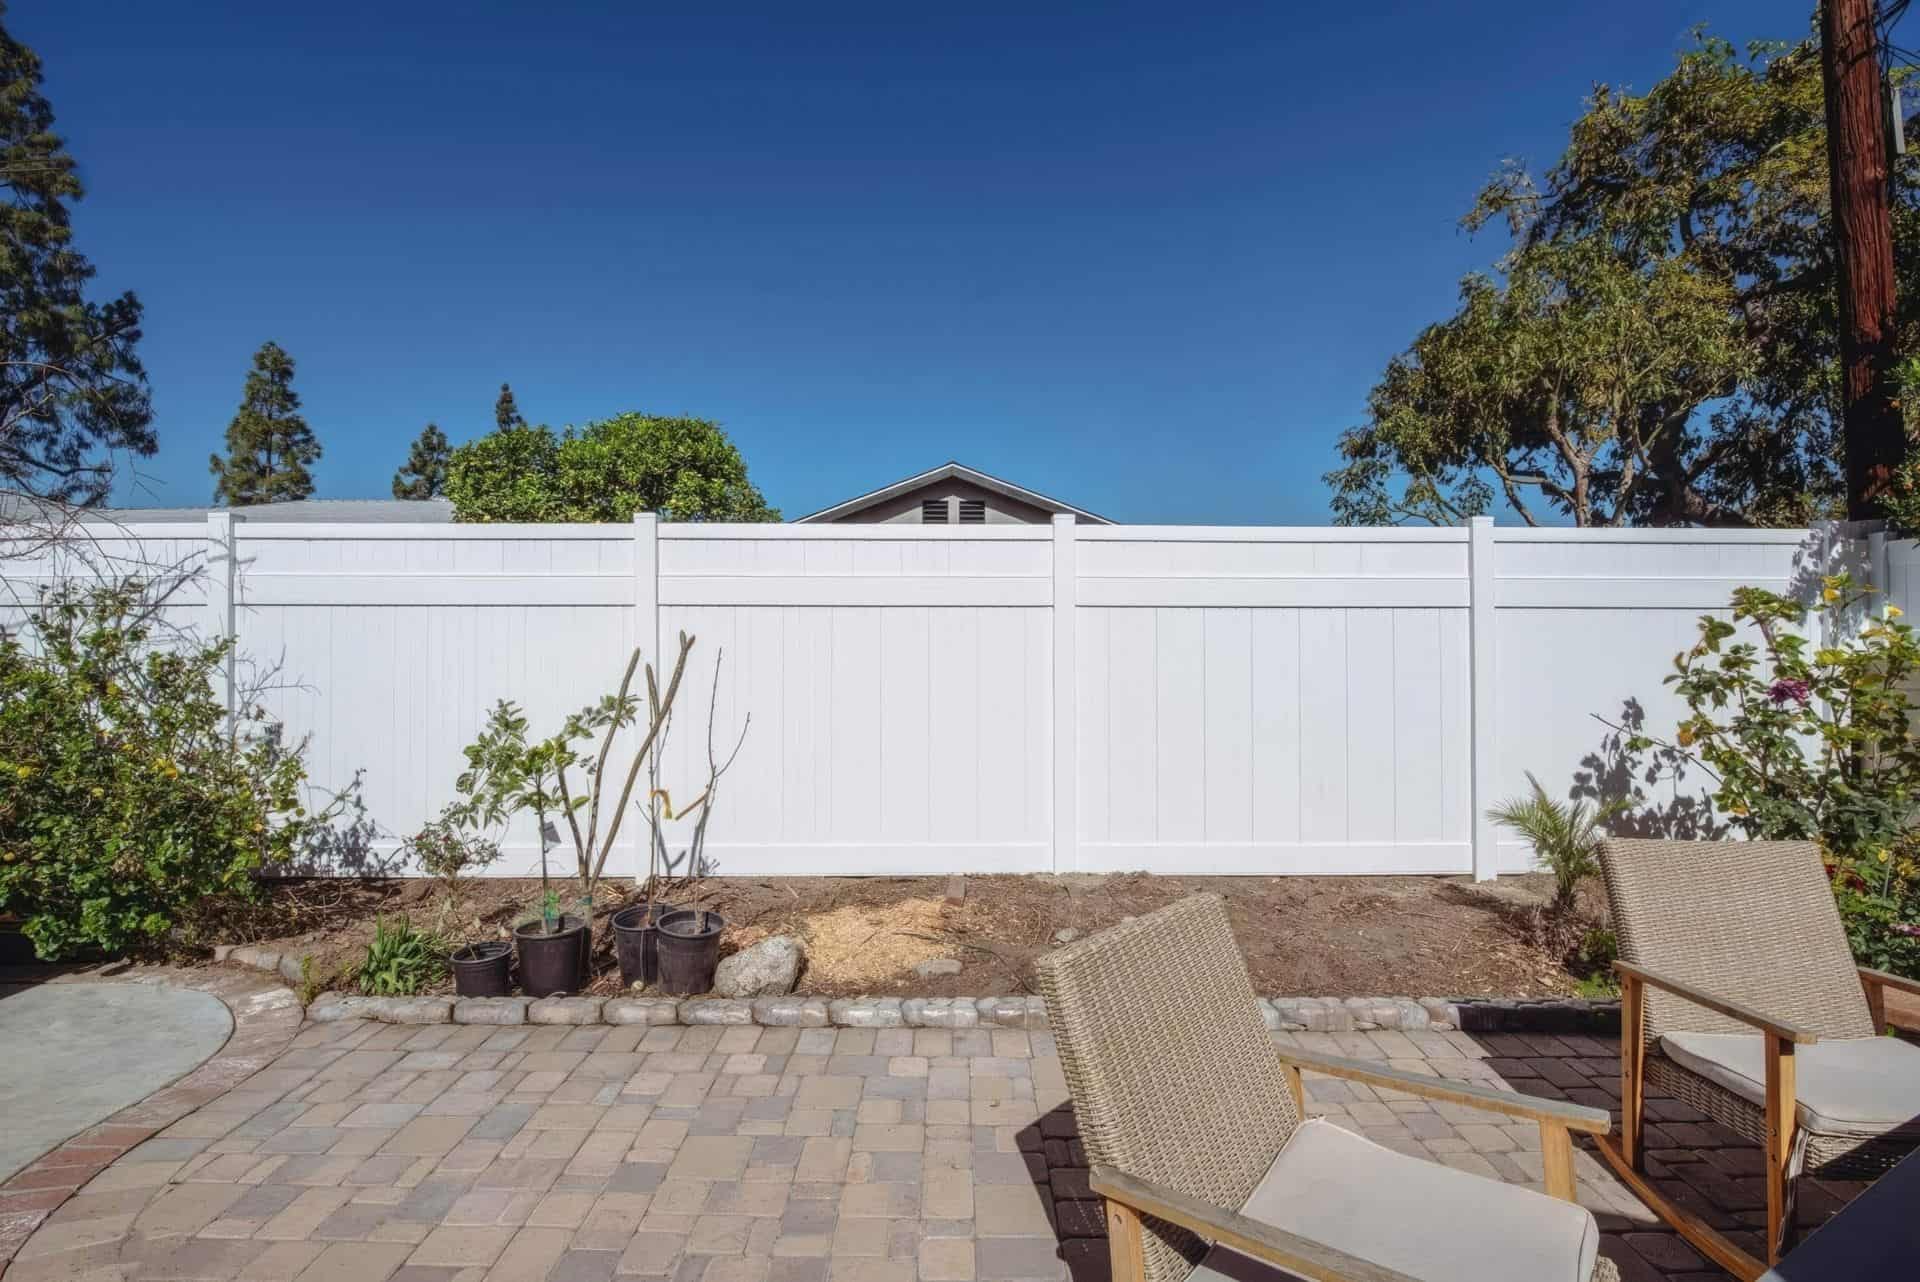 Vinyl privacy backyard fence surrounding backyard red brick oasis with walkway and small garden patch to the side.